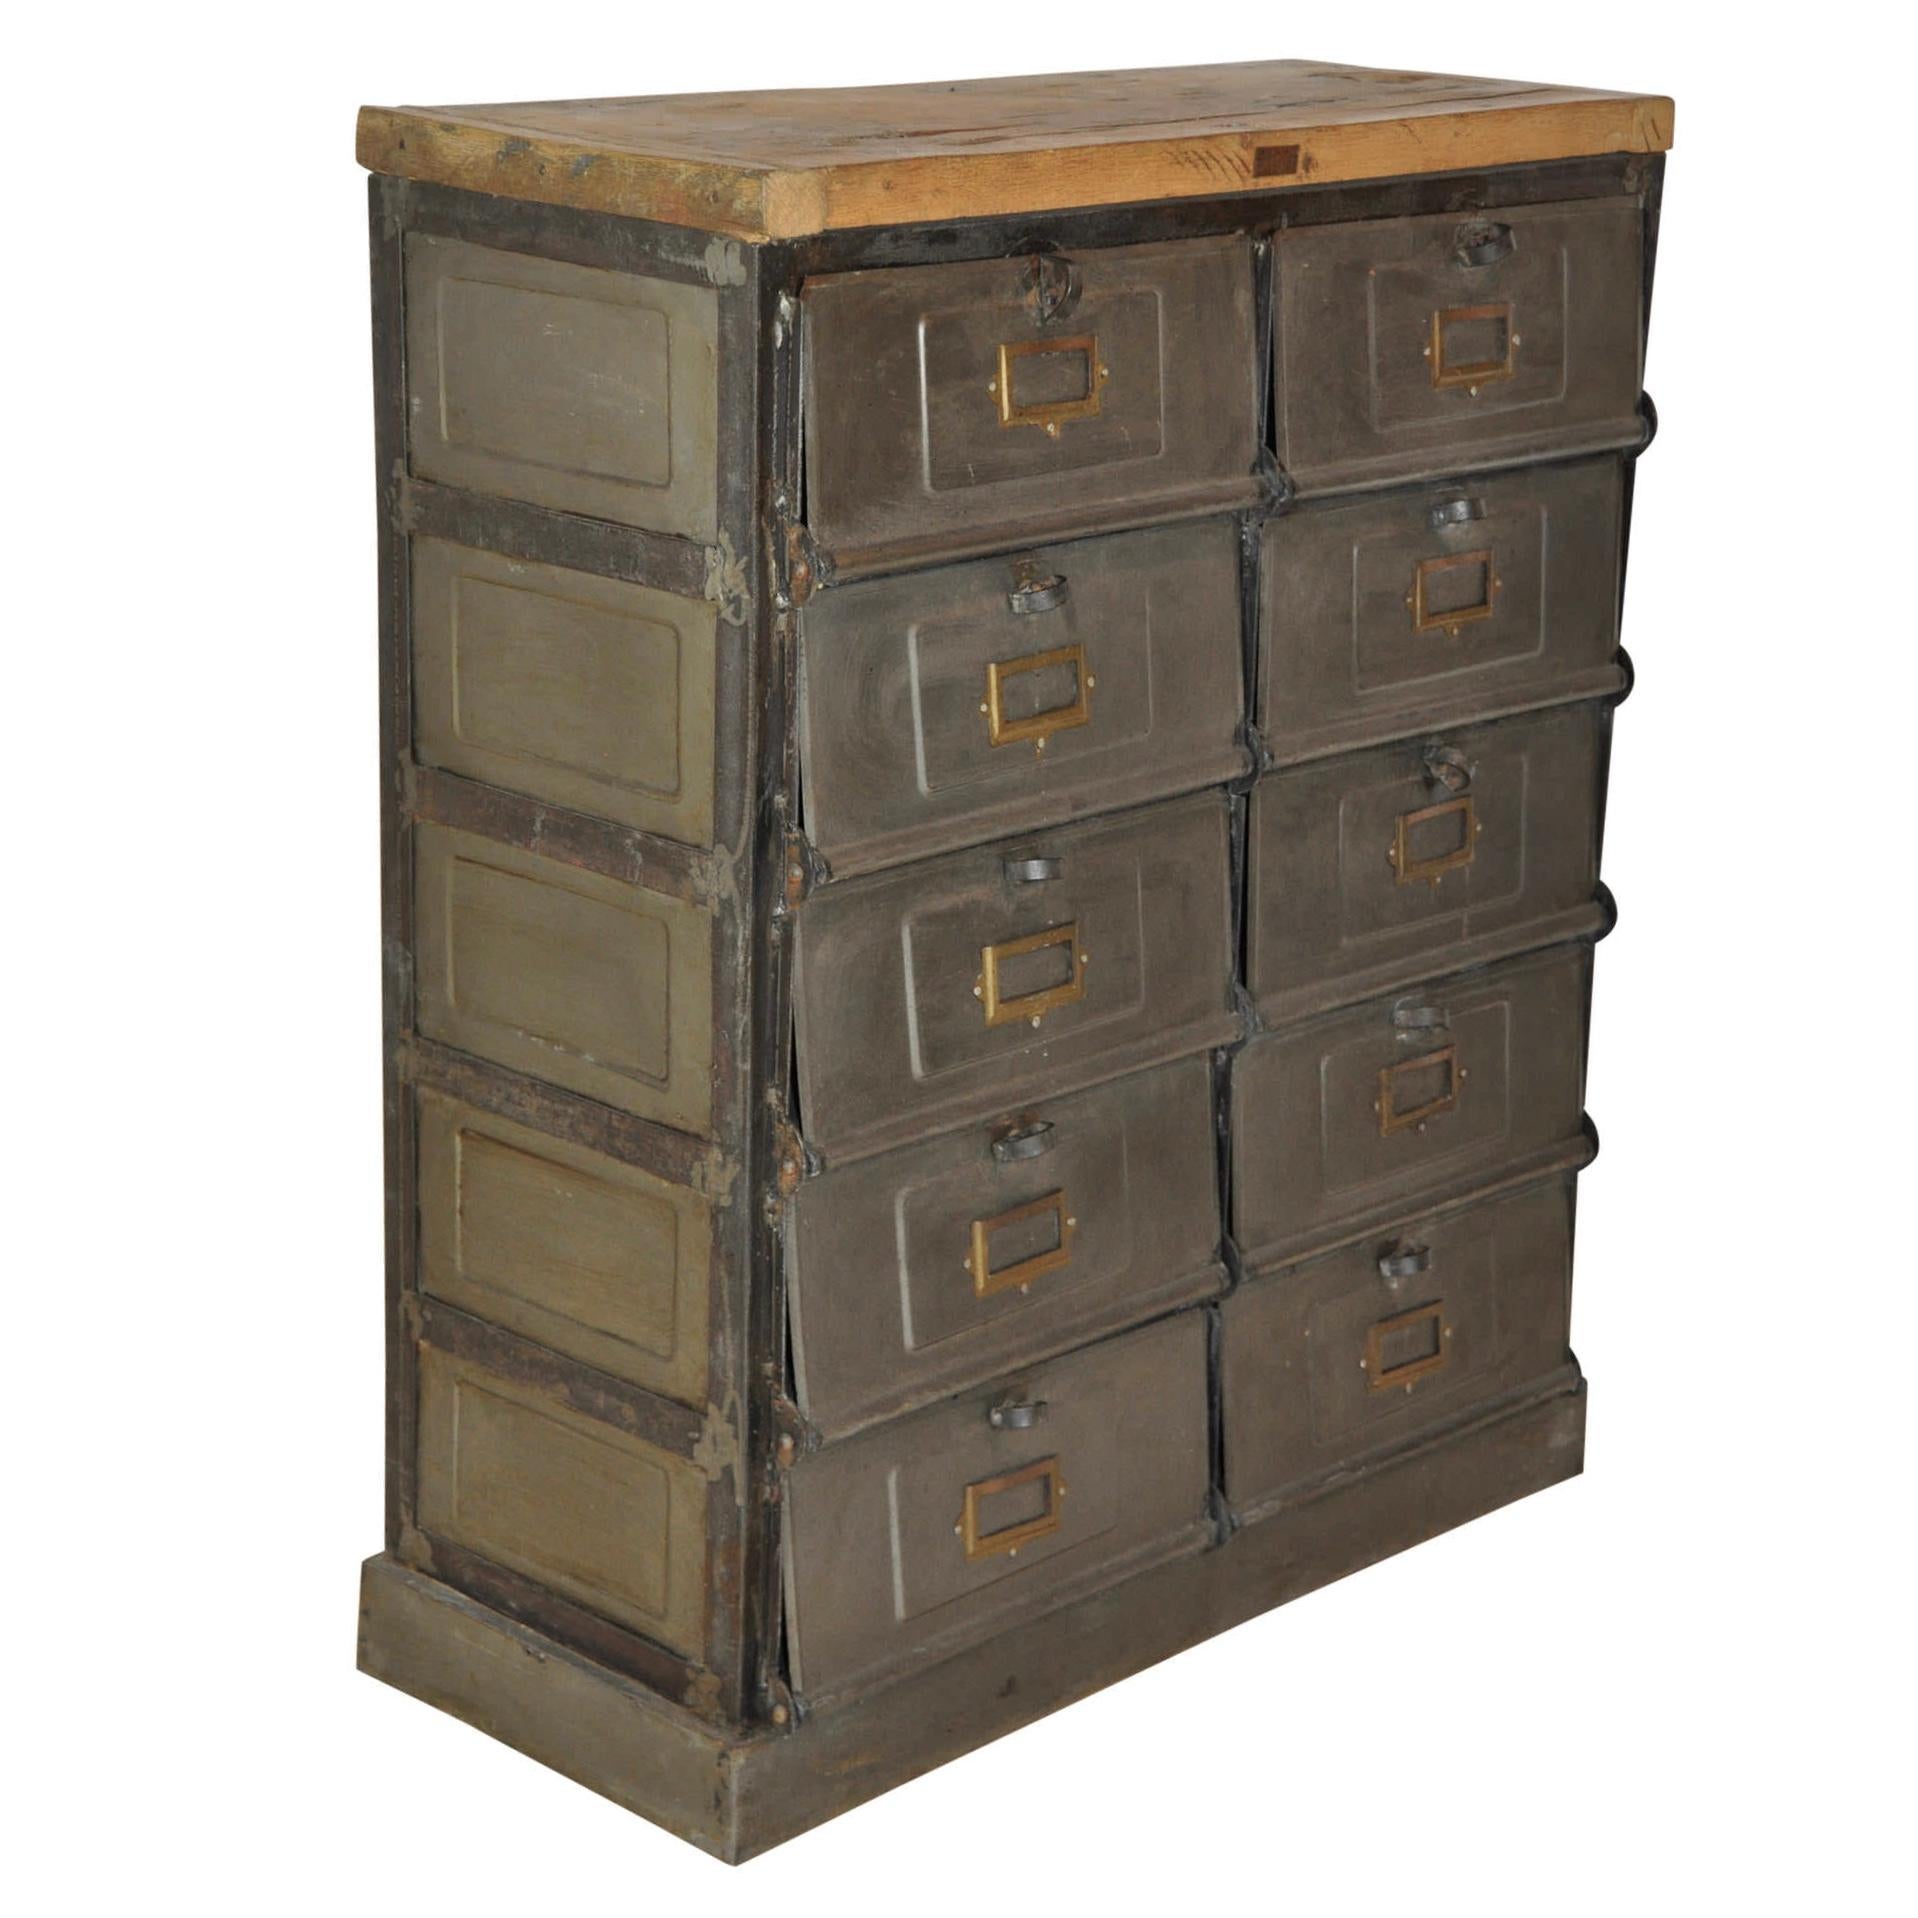 A post office, hotel, factory, or business likely used this ten door console for mail. The doors are hinged at the bottom and latch/unlatch by turning the looped handles. Brass card or name holders are on the front of each door. Compartment sizes